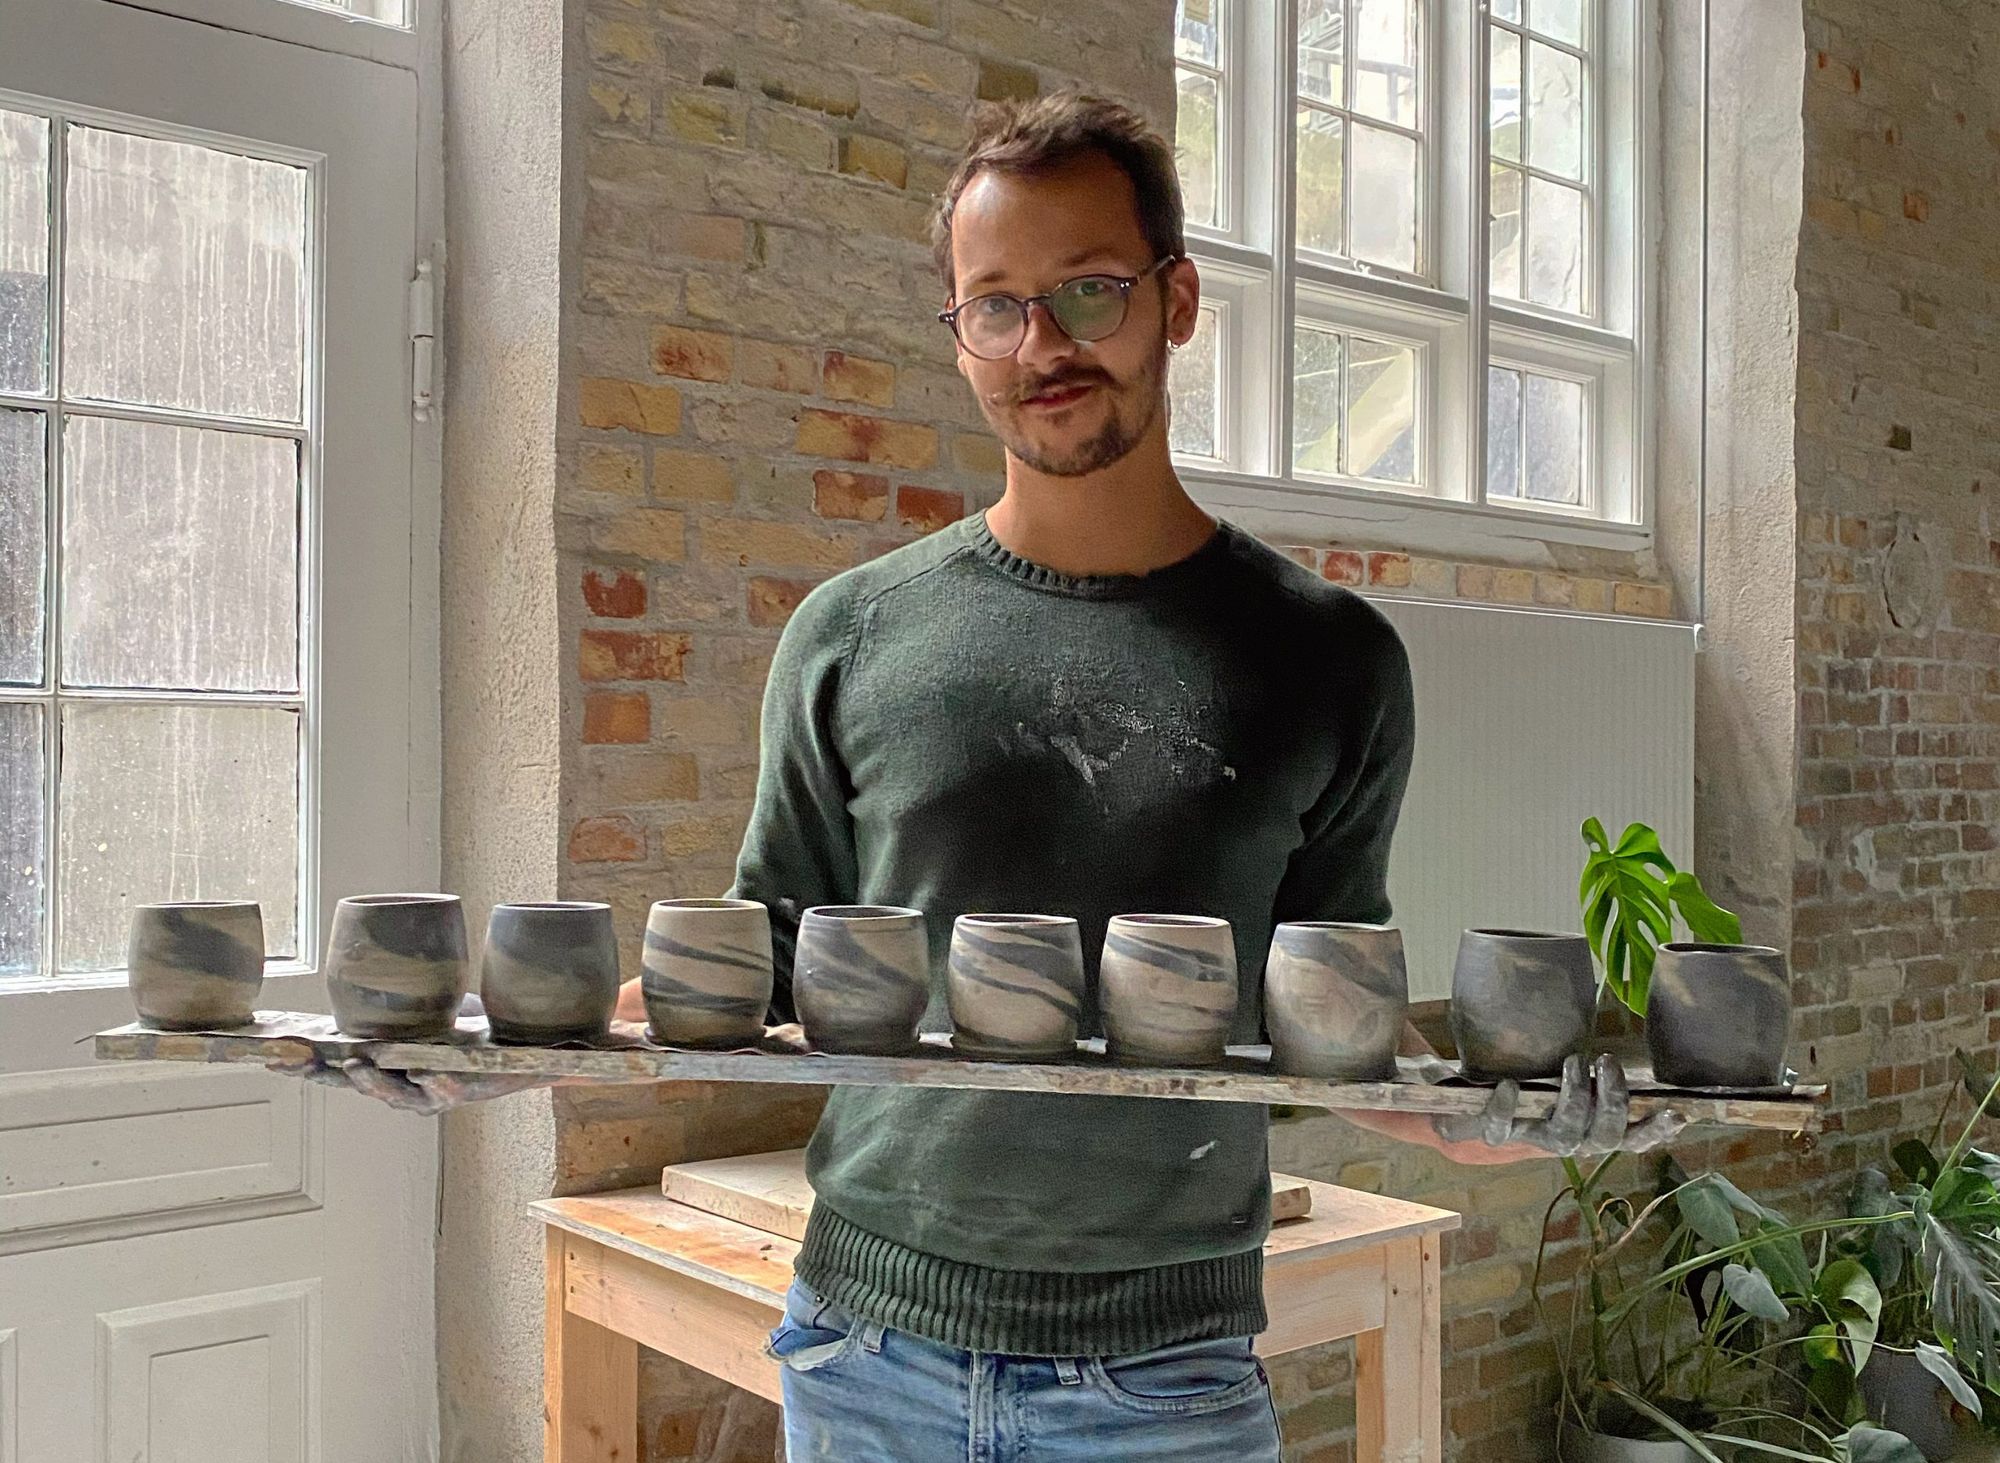 The programmer ceramicist, who is always looking for contrasts